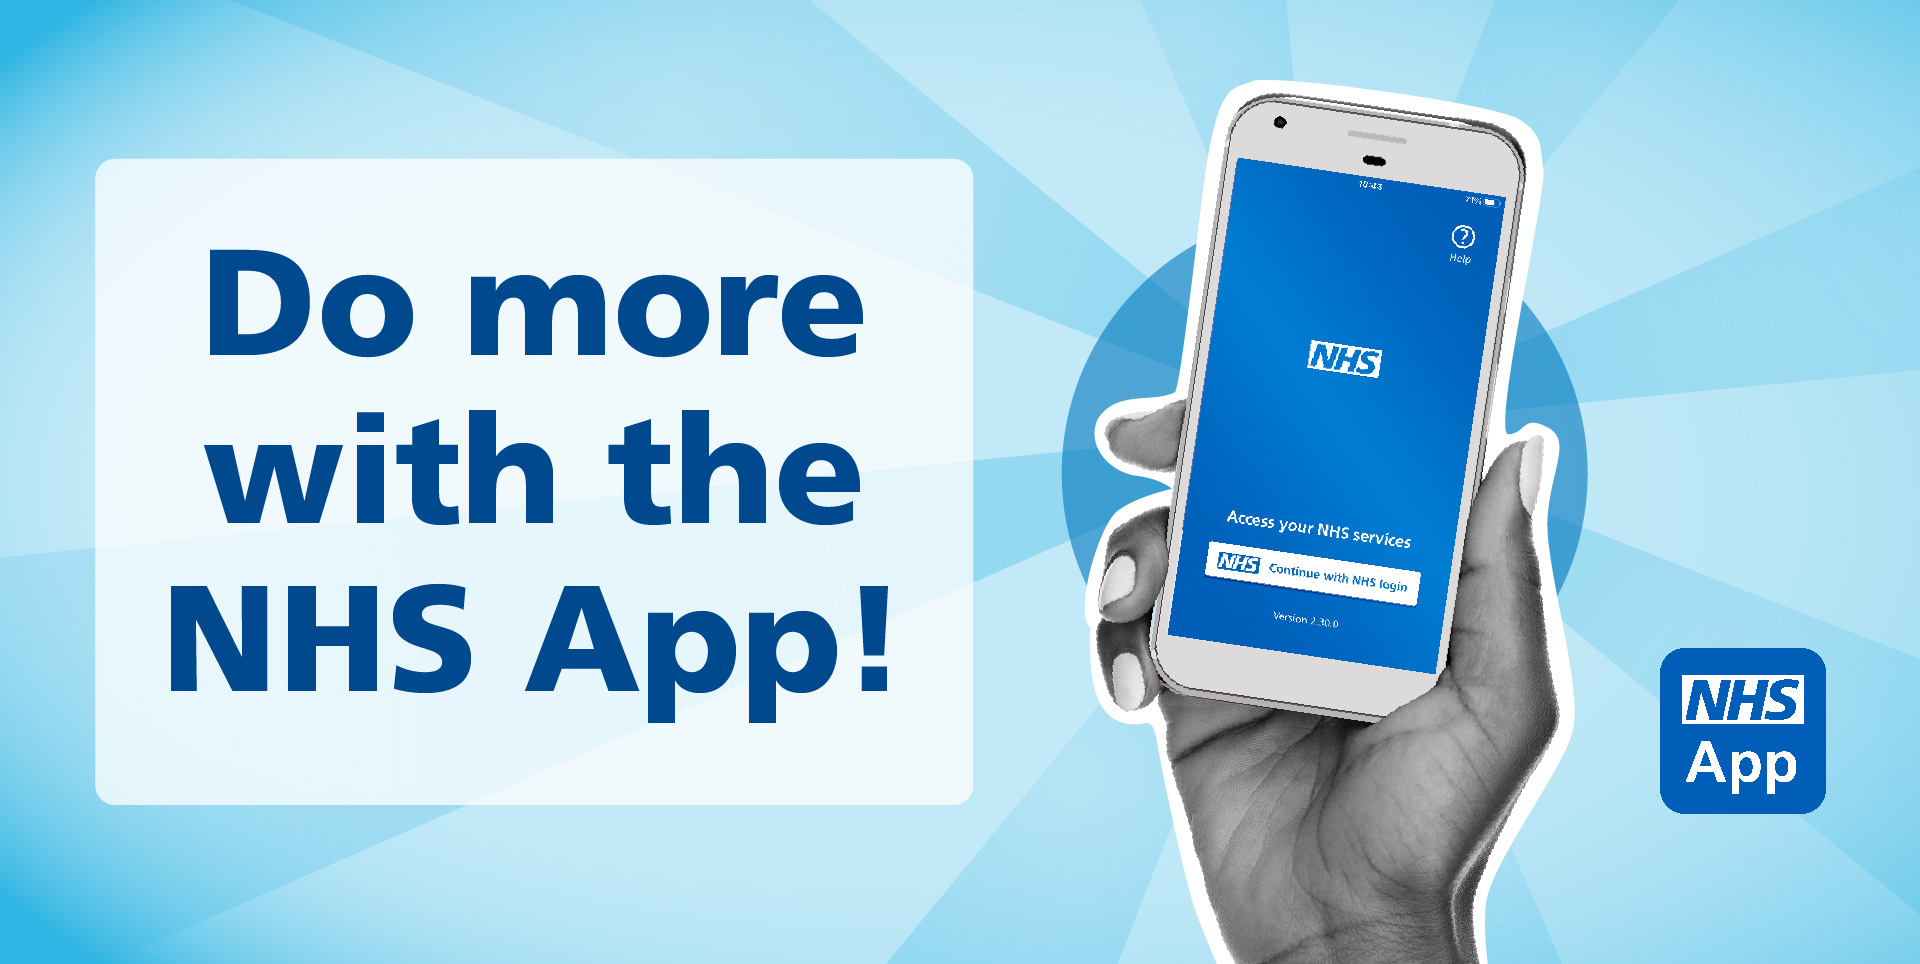 do more with the nhs app text on an image of a mobile phone